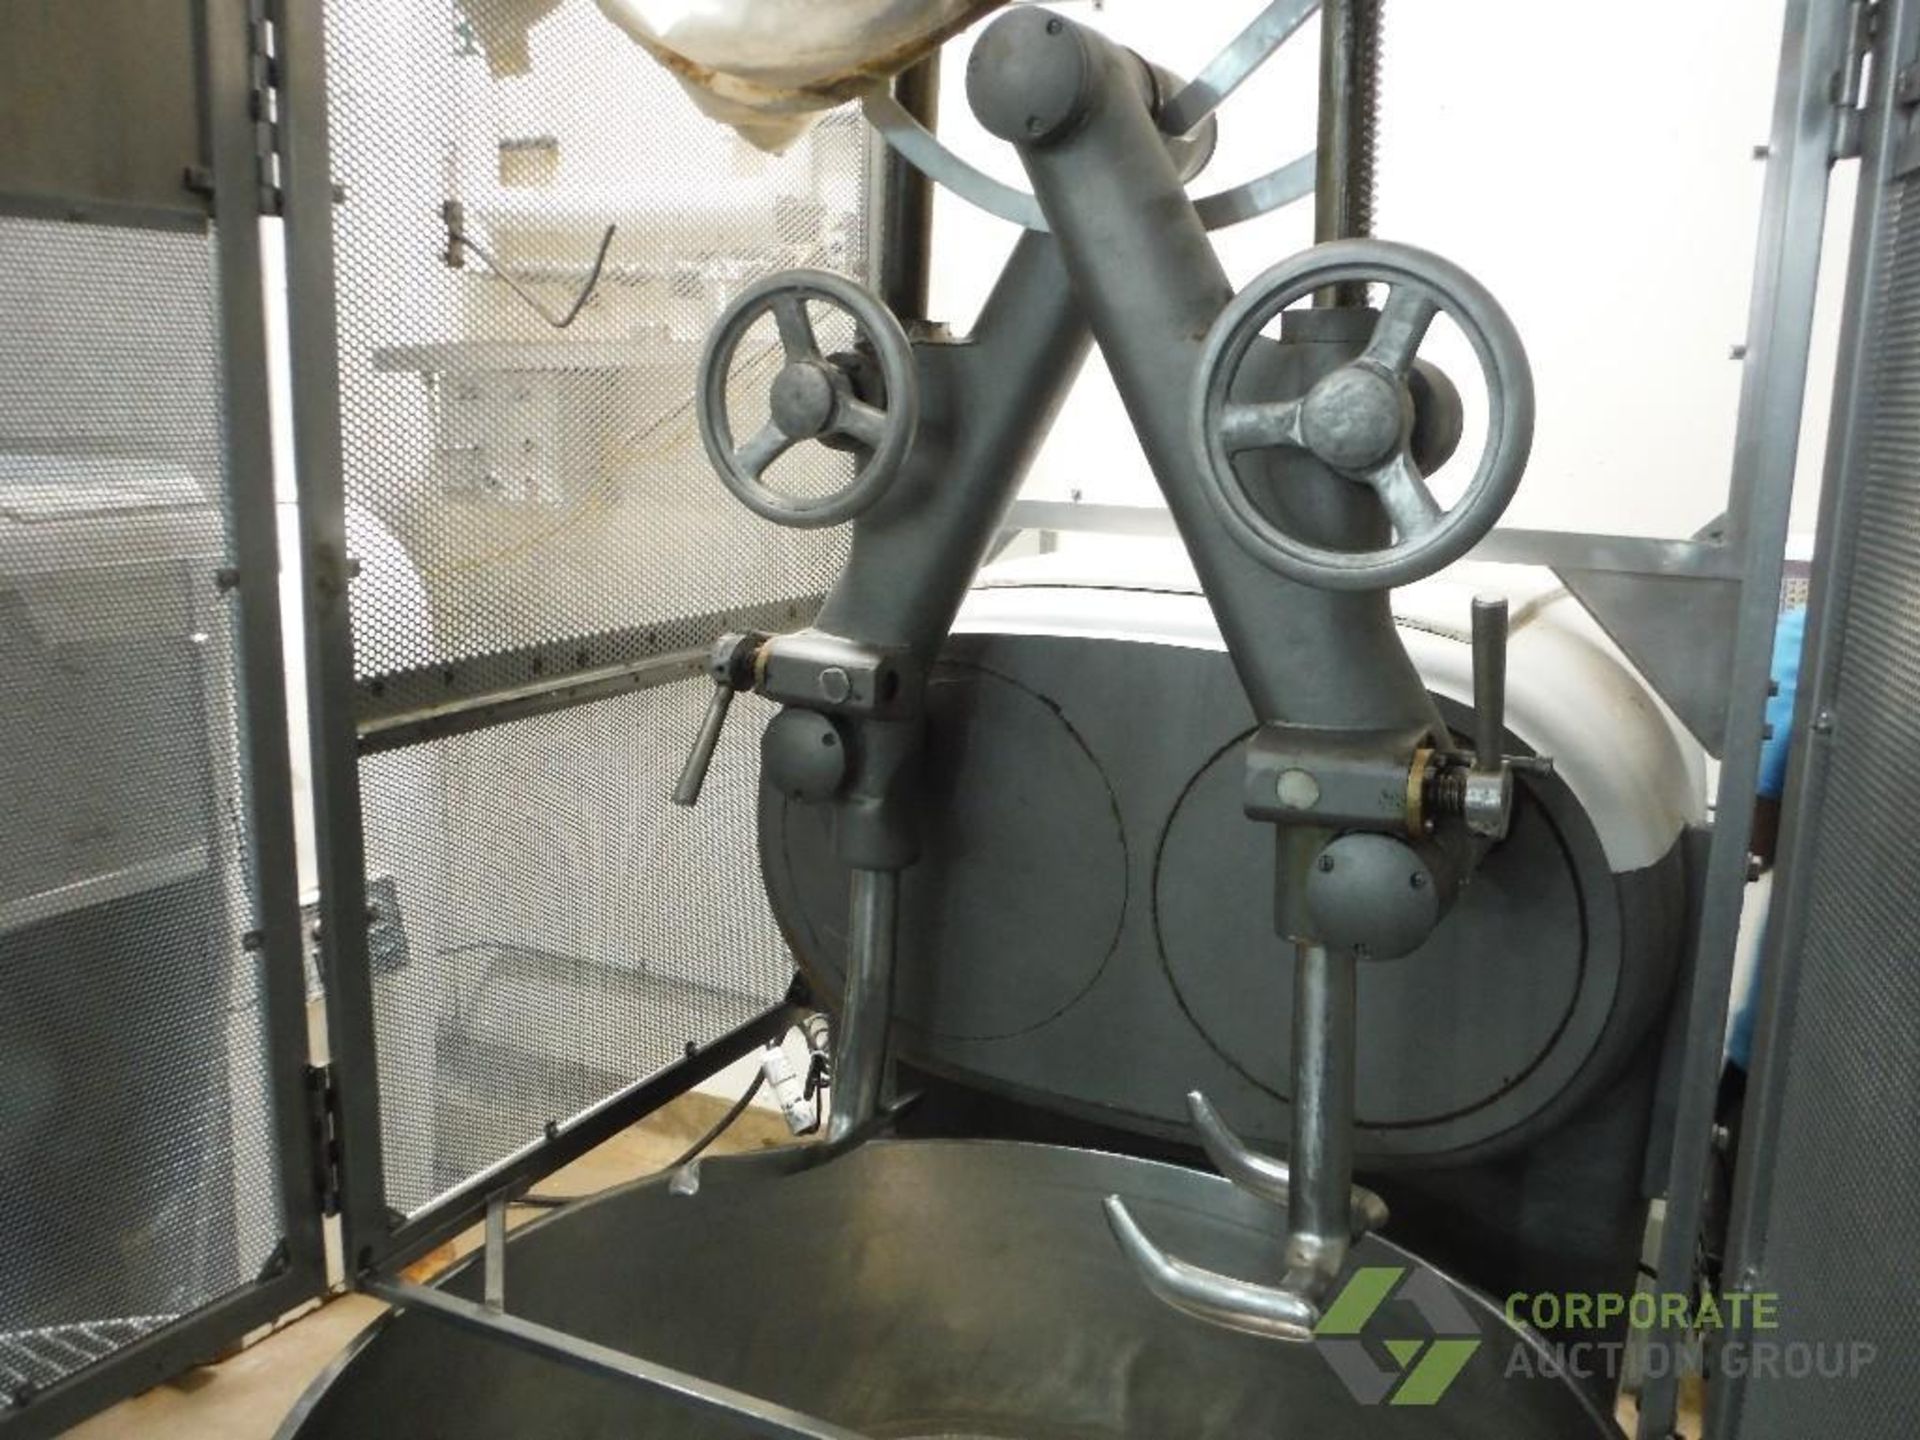 2000 Pietroberto double arm mixer, Model 1BT/300-A, SN 2000000504, with SS mix bowl and cart, 44 in. - Image 3 of 8